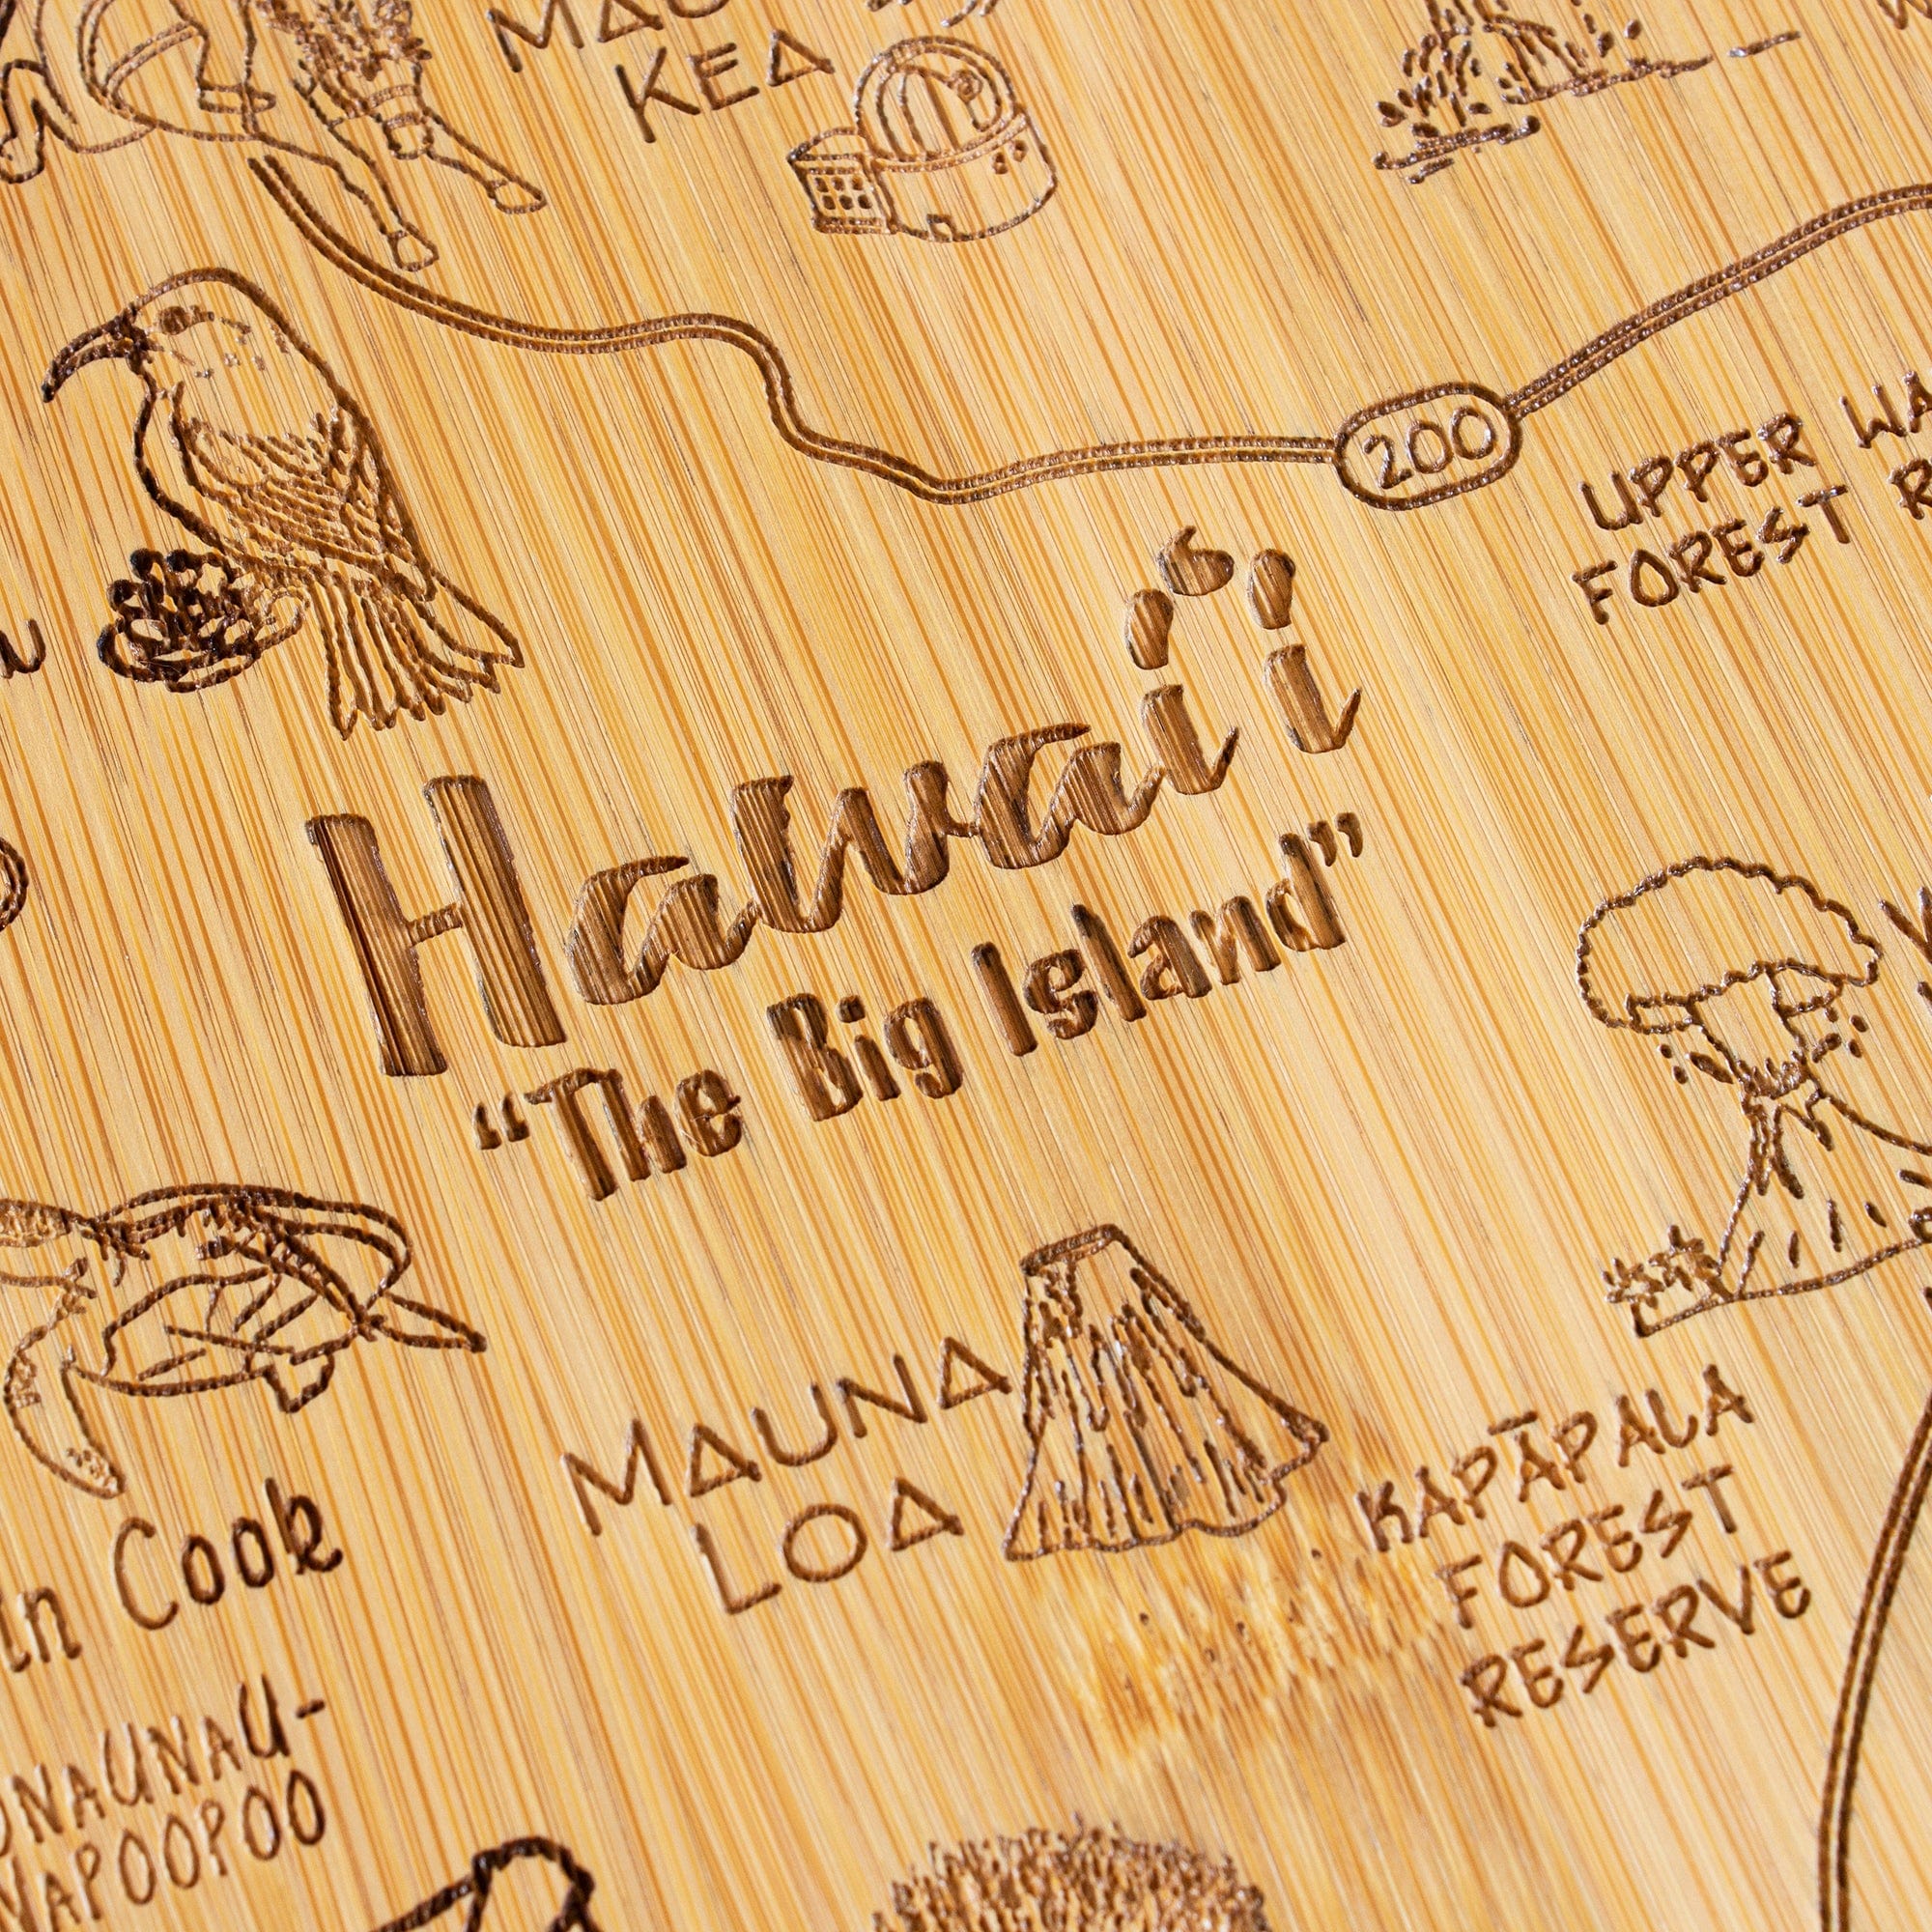 Totally Bamboo Destination Hawaii Island Shaped Bamboo Serving and Cutting Board